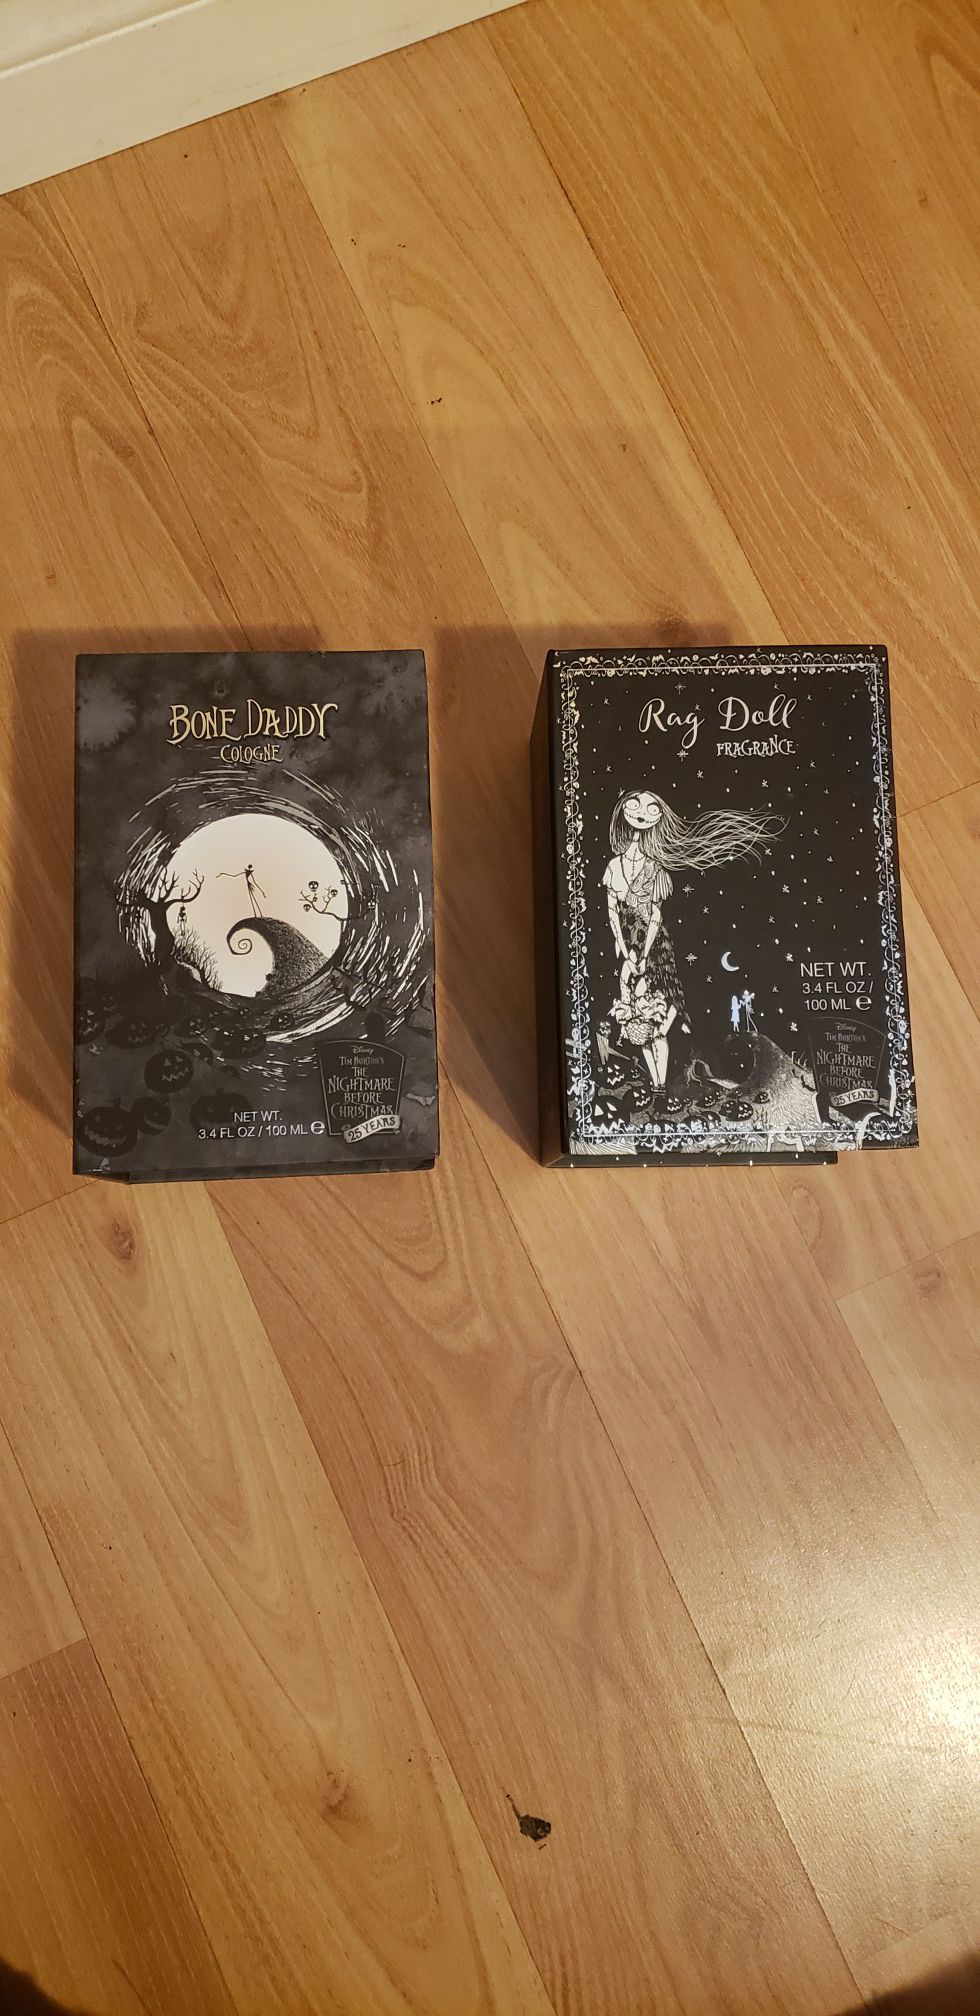 Nightmare Before Christmas Bone Daddy and Rag Doll Cologne Fragrance 25th Anniversary Packaging Halloween